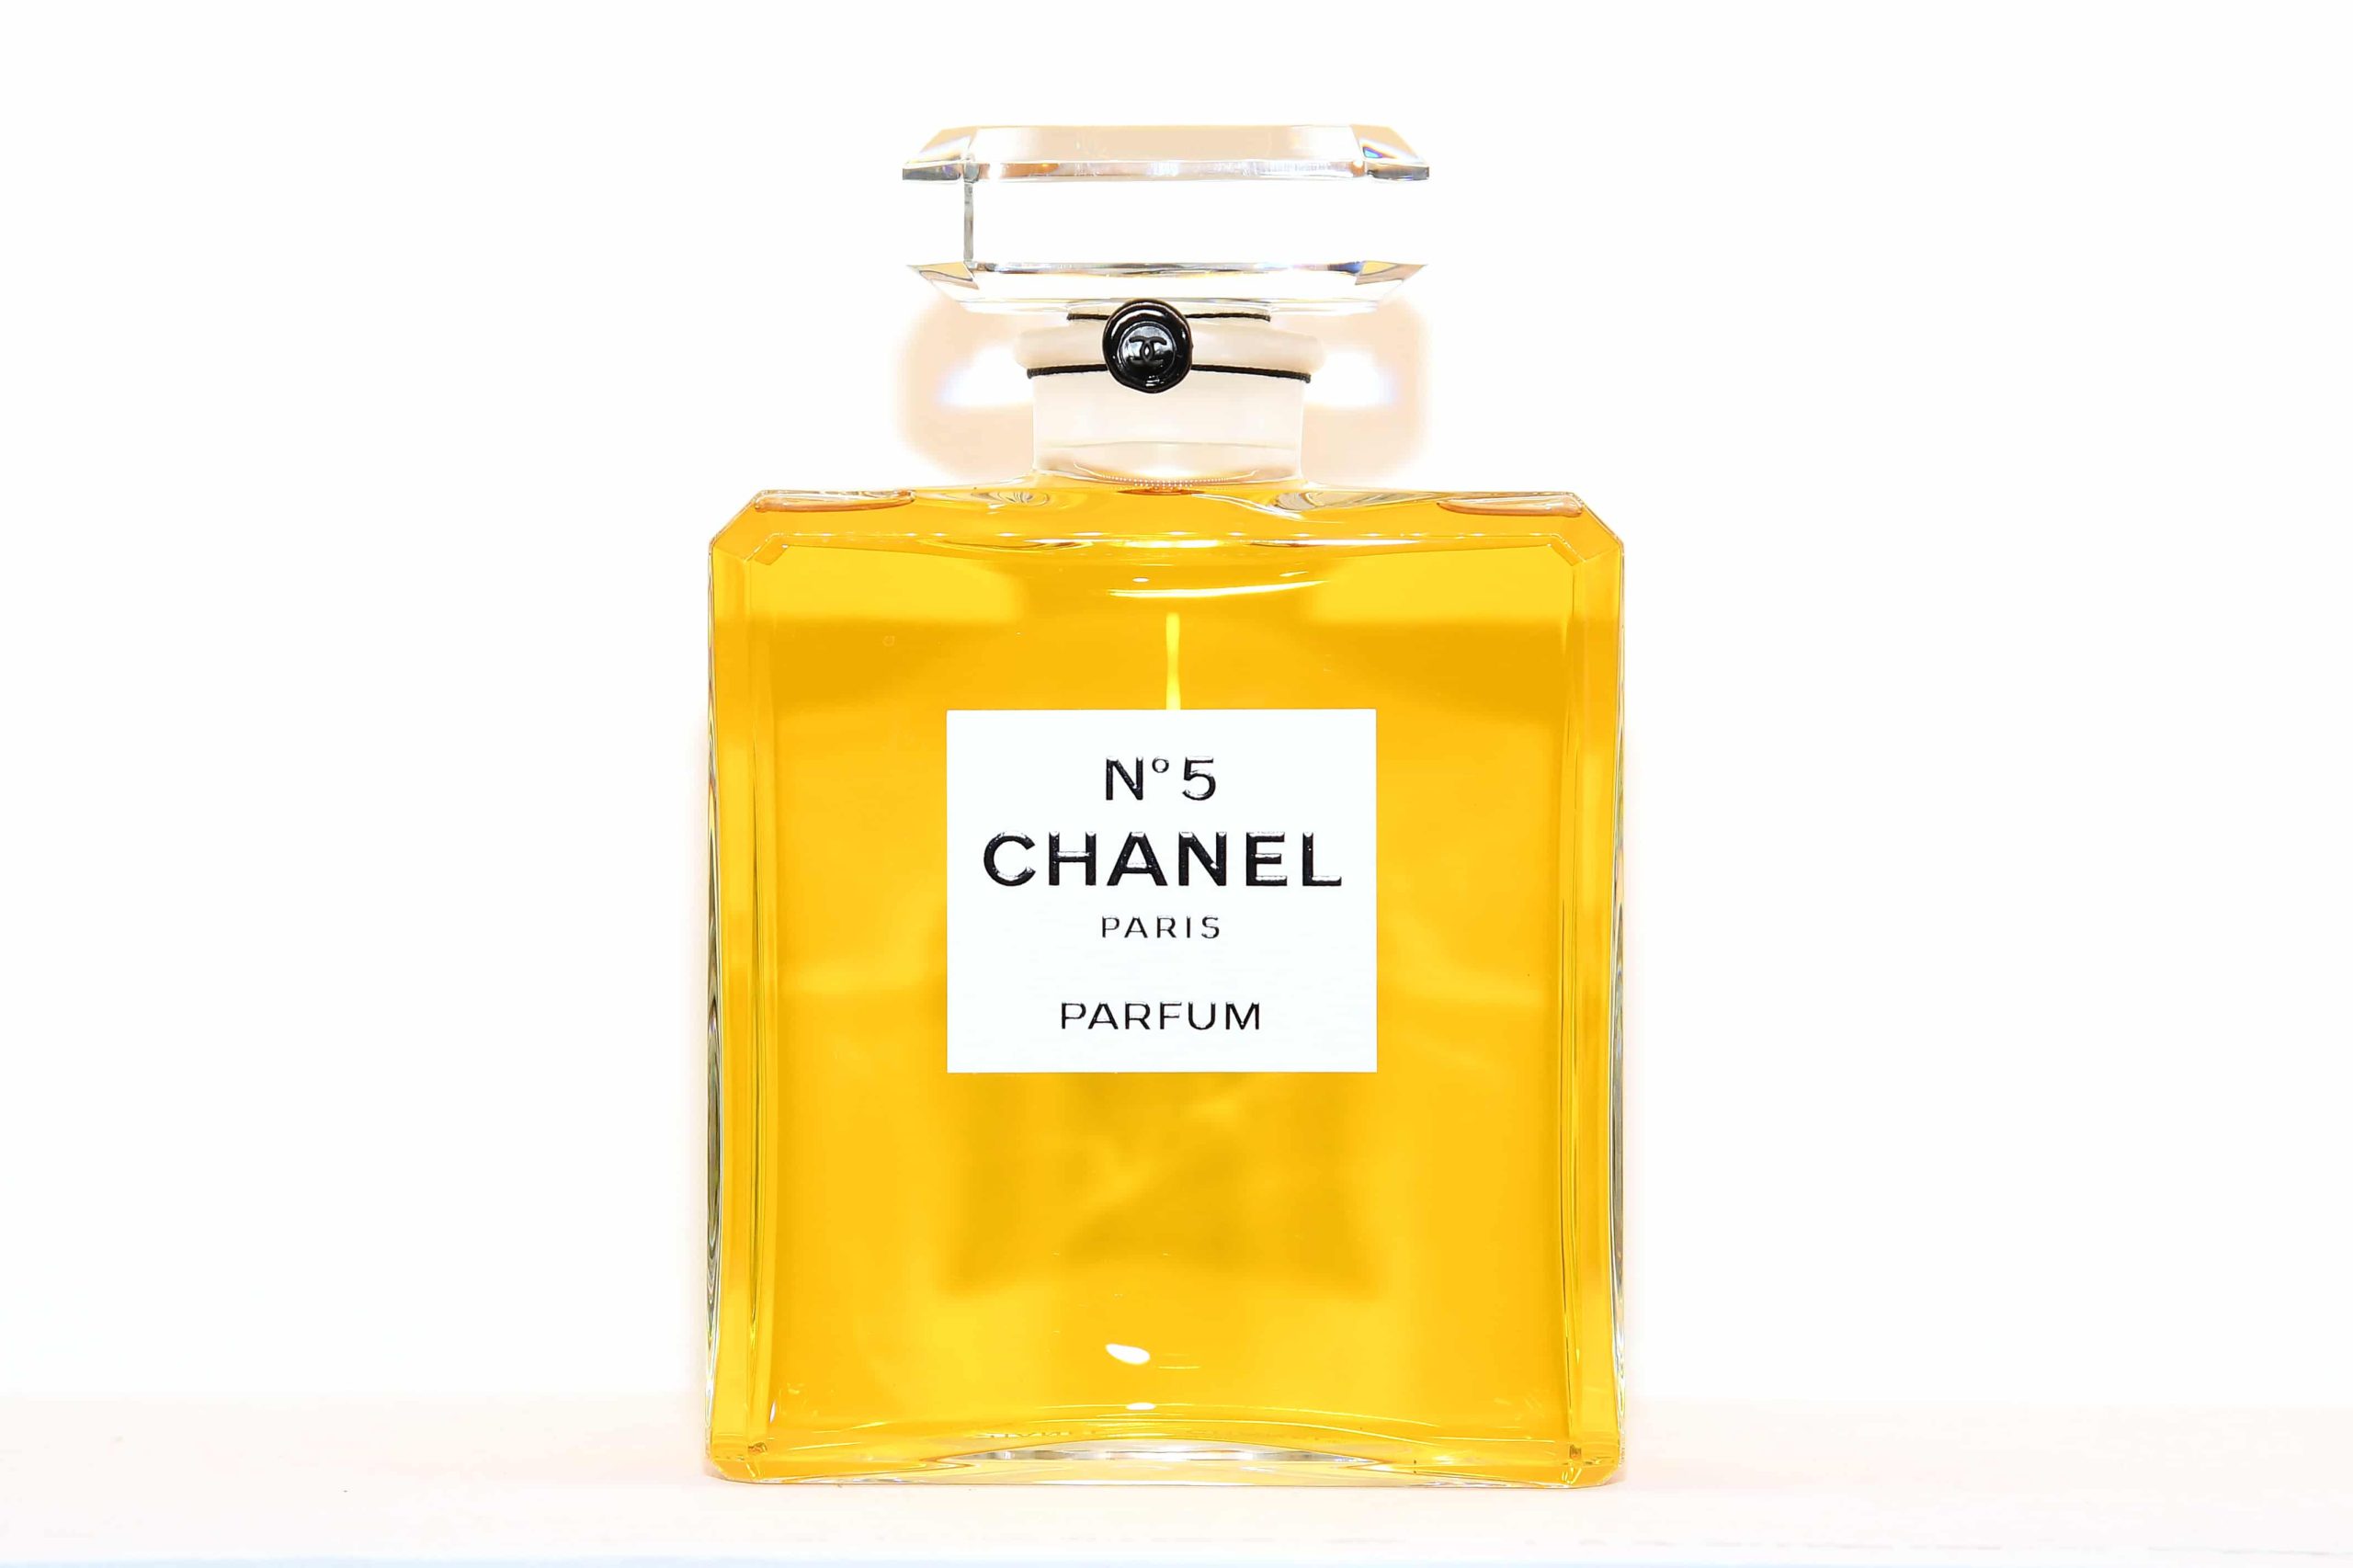 City of Grasse: Chanel buys jasmine fields to ensure its mythical